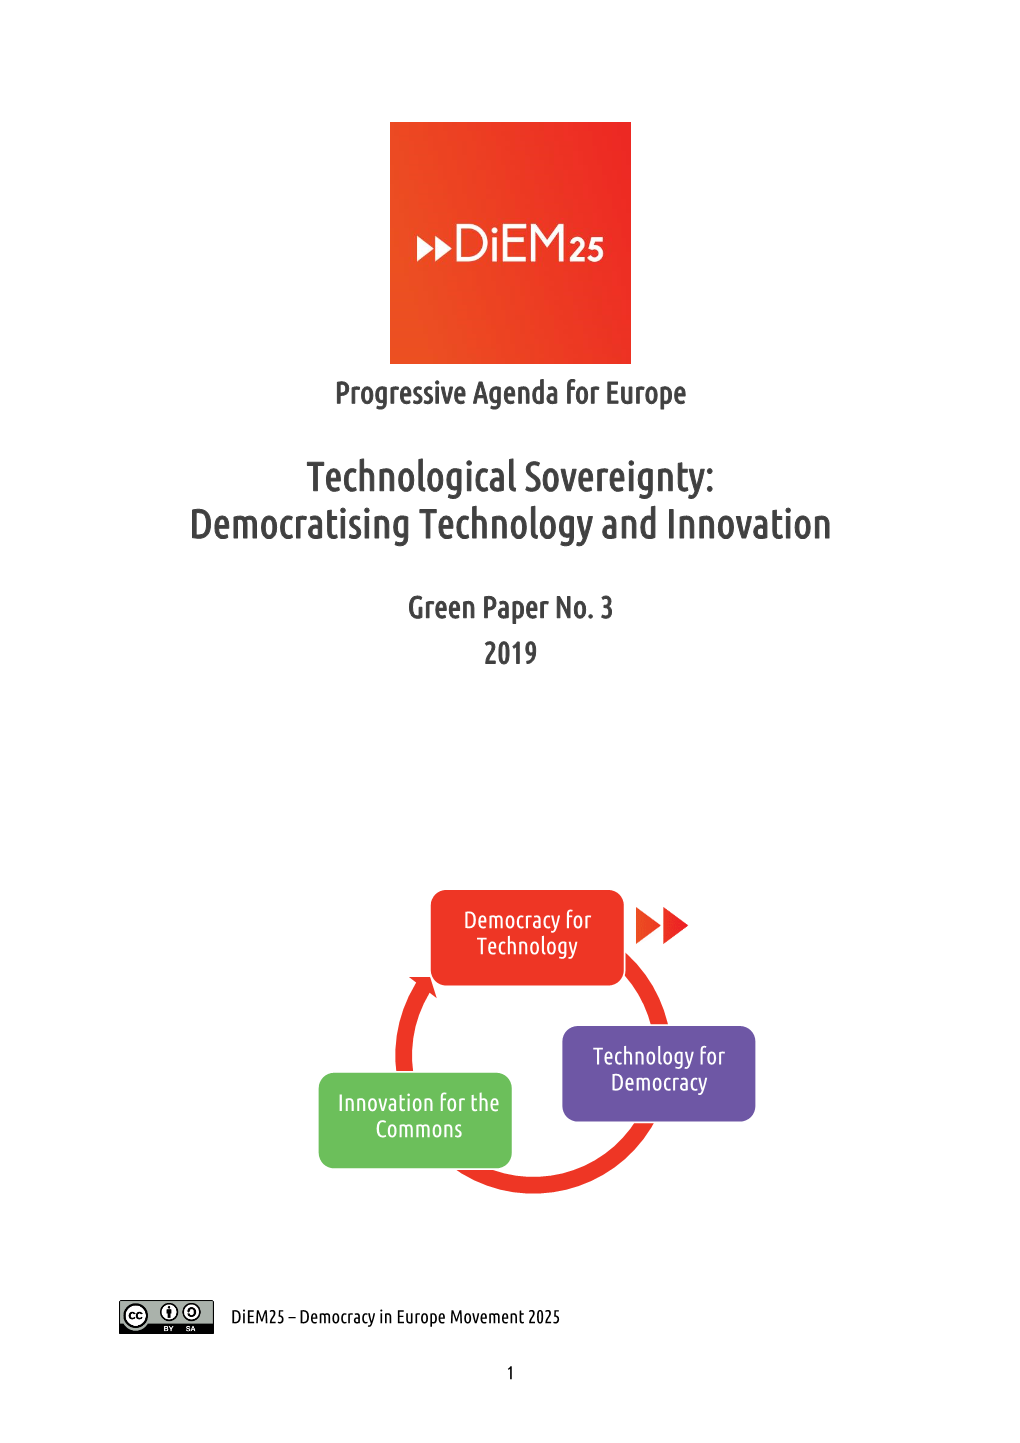 Technological Sovereignty: Democratising Technology and Innovation